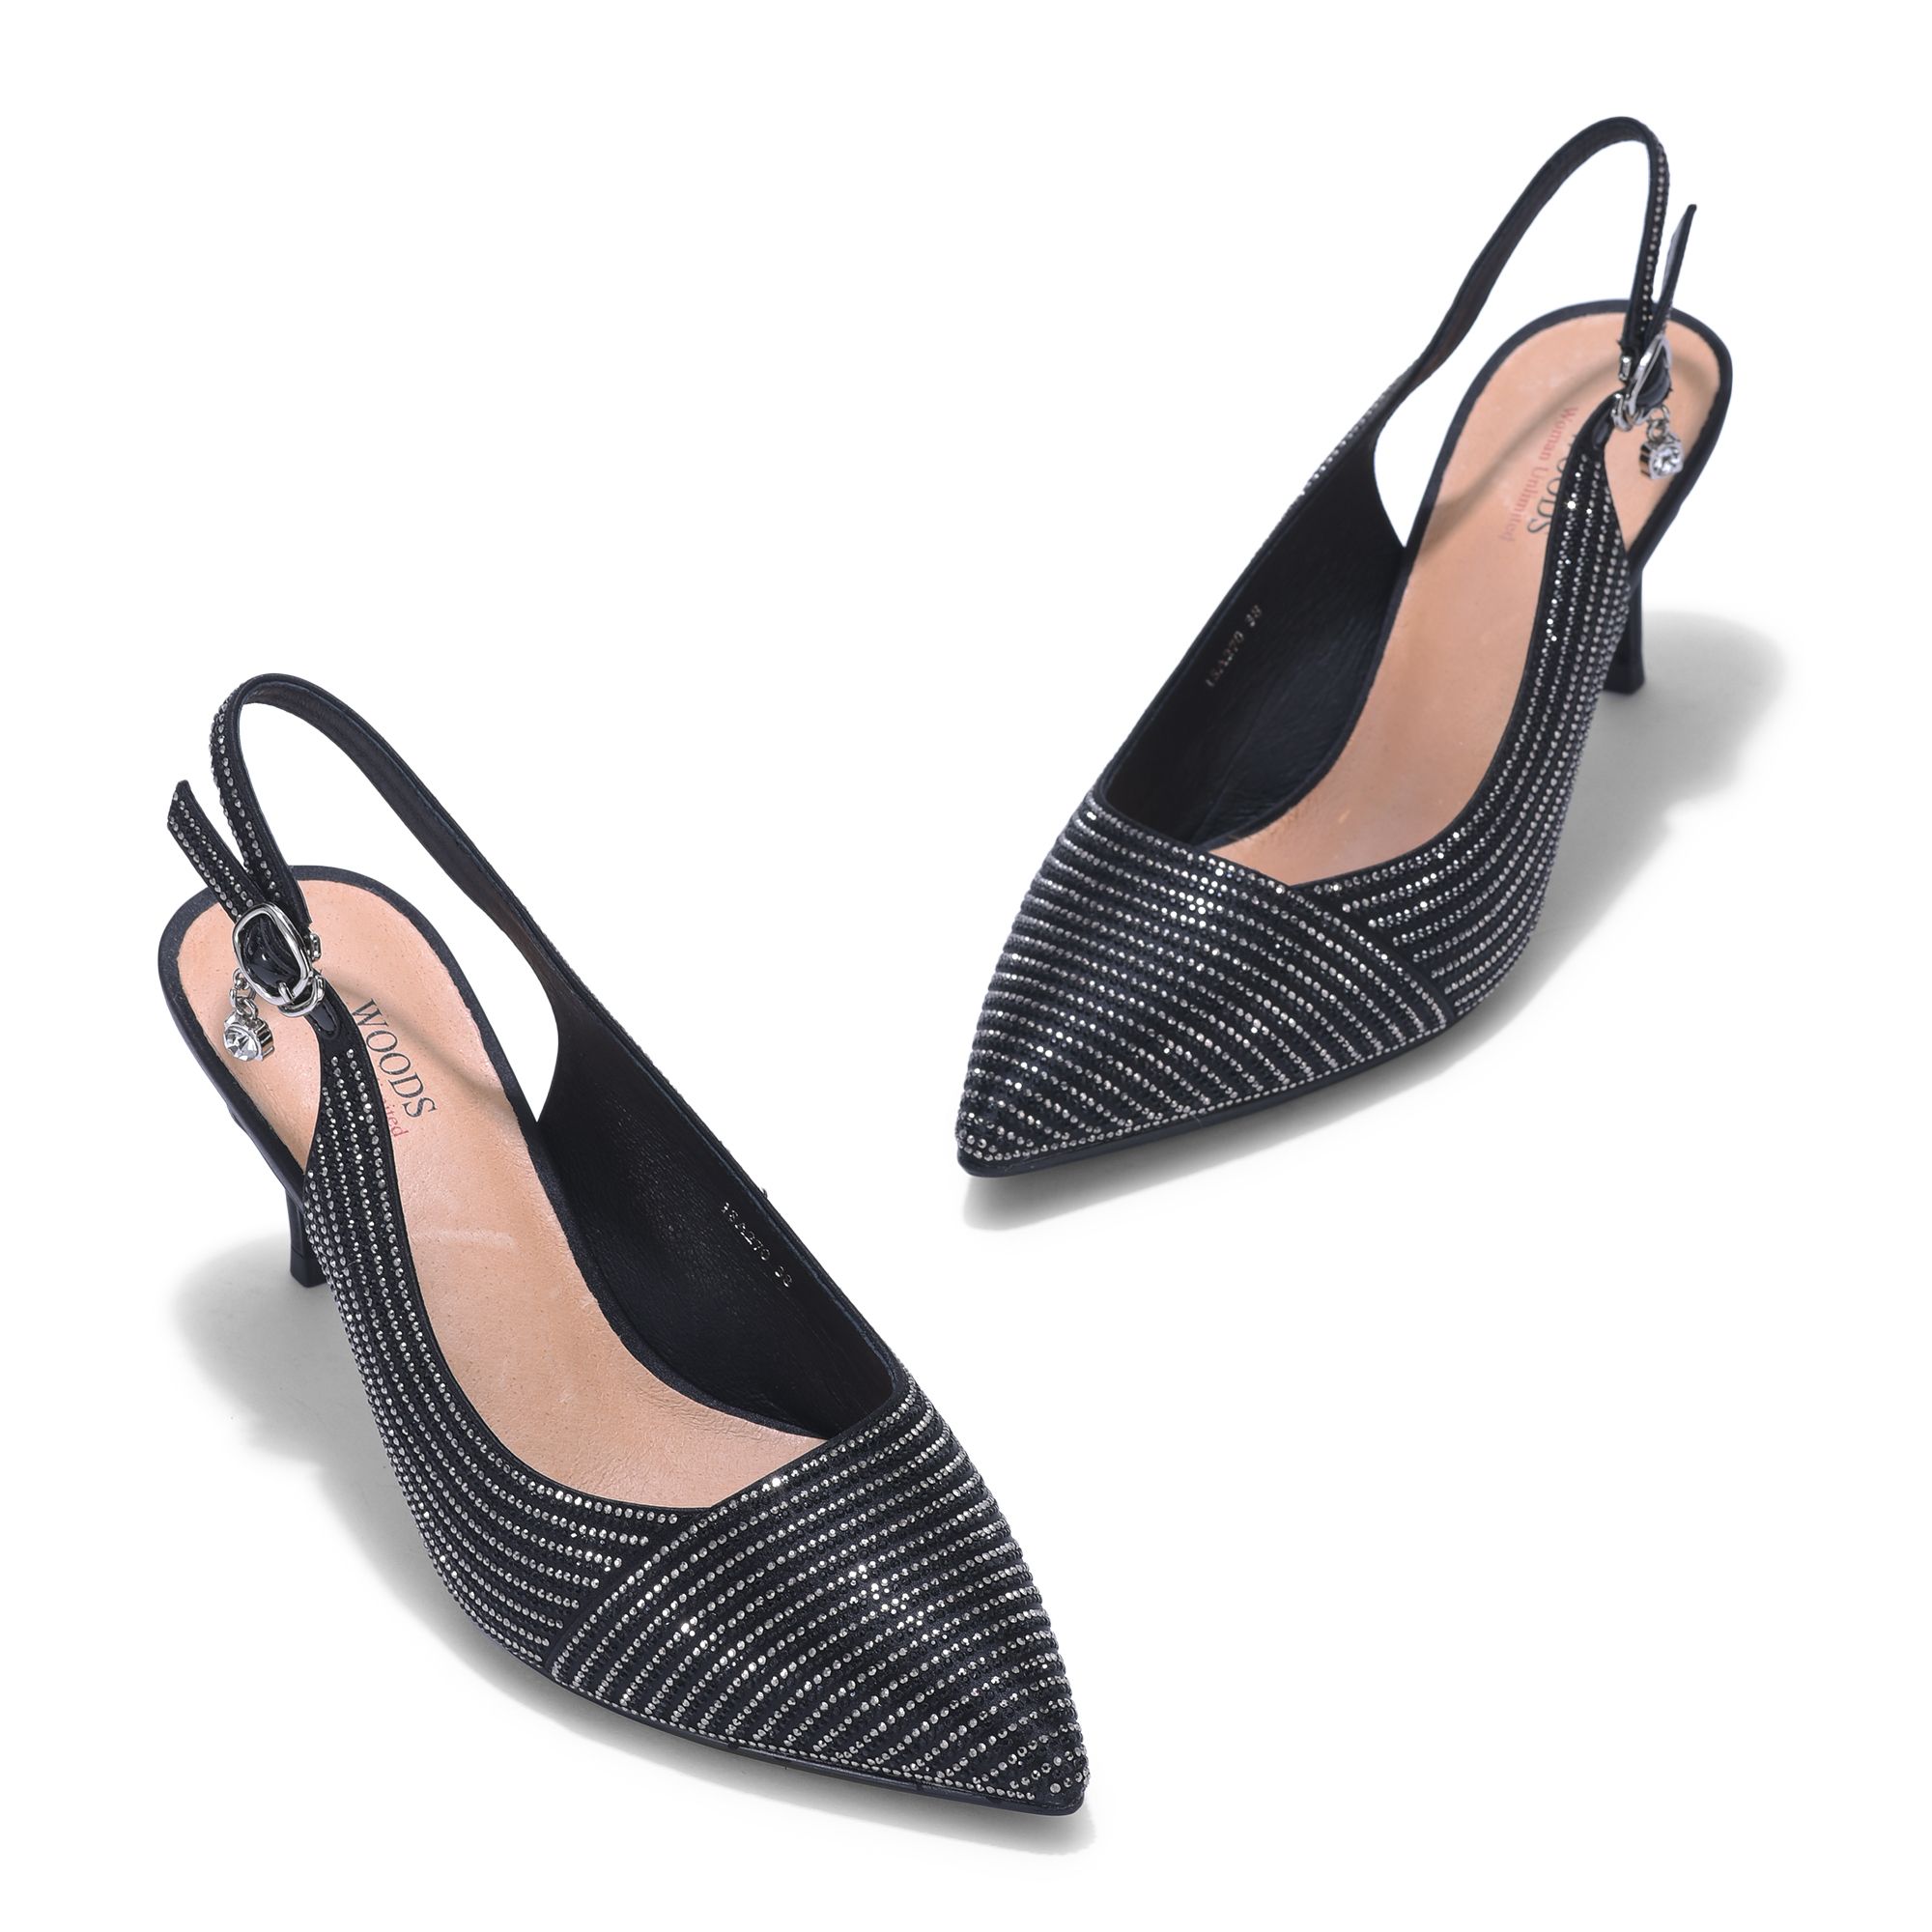 Woods BLACK pointed toe pumps